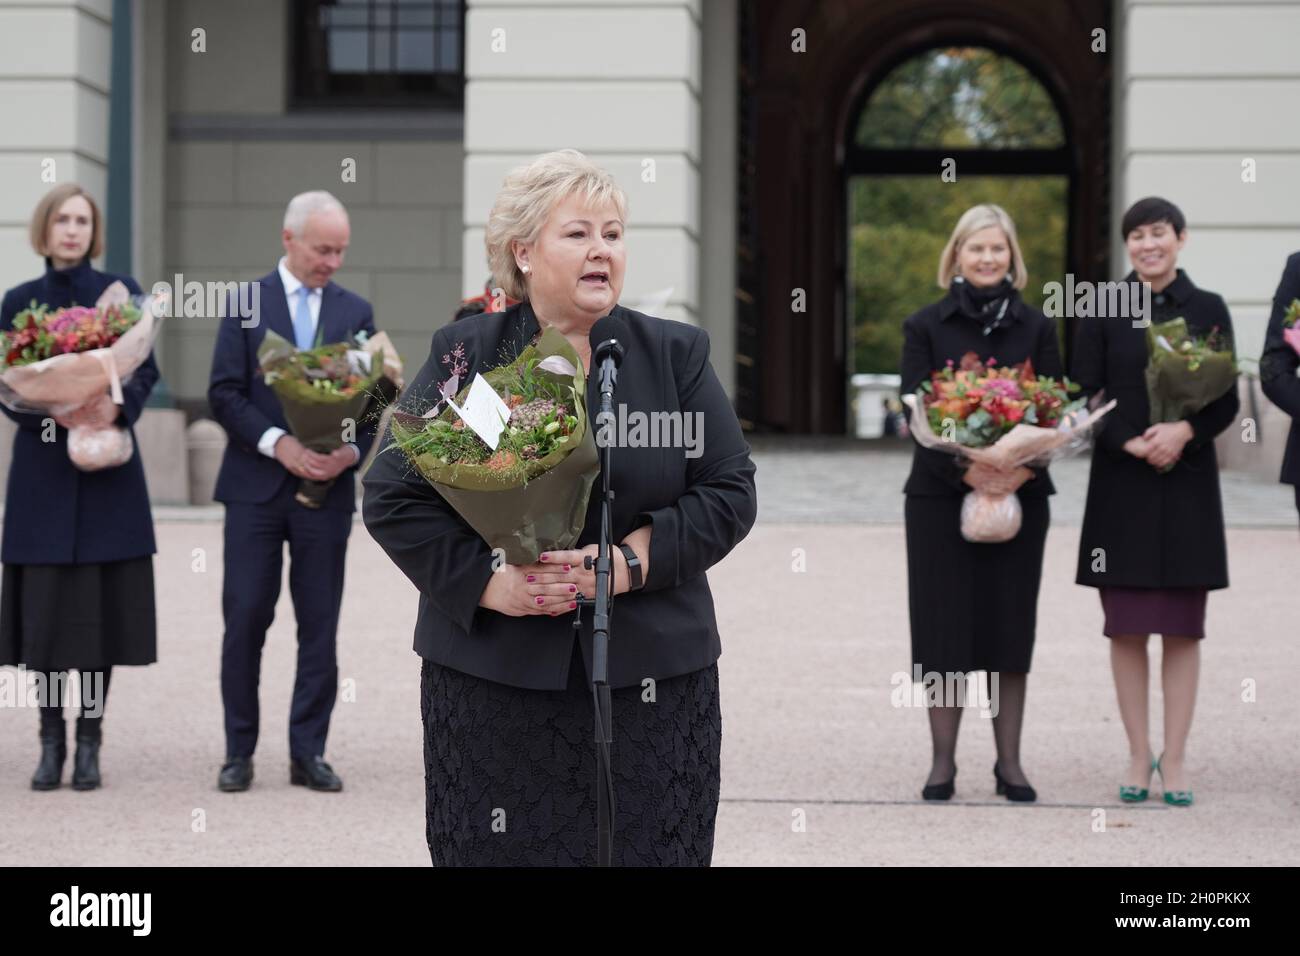 Oslo 20211014.Prime Minister Erna Solberg in front of f.v. Iselin Nybo, Jan Tore Sanner, Guri Melby and Ine Eriksen Soreide, after the outgoing government's last minister at the castle. Photo: Ole Berg-Rusten / NTB Stock Photo